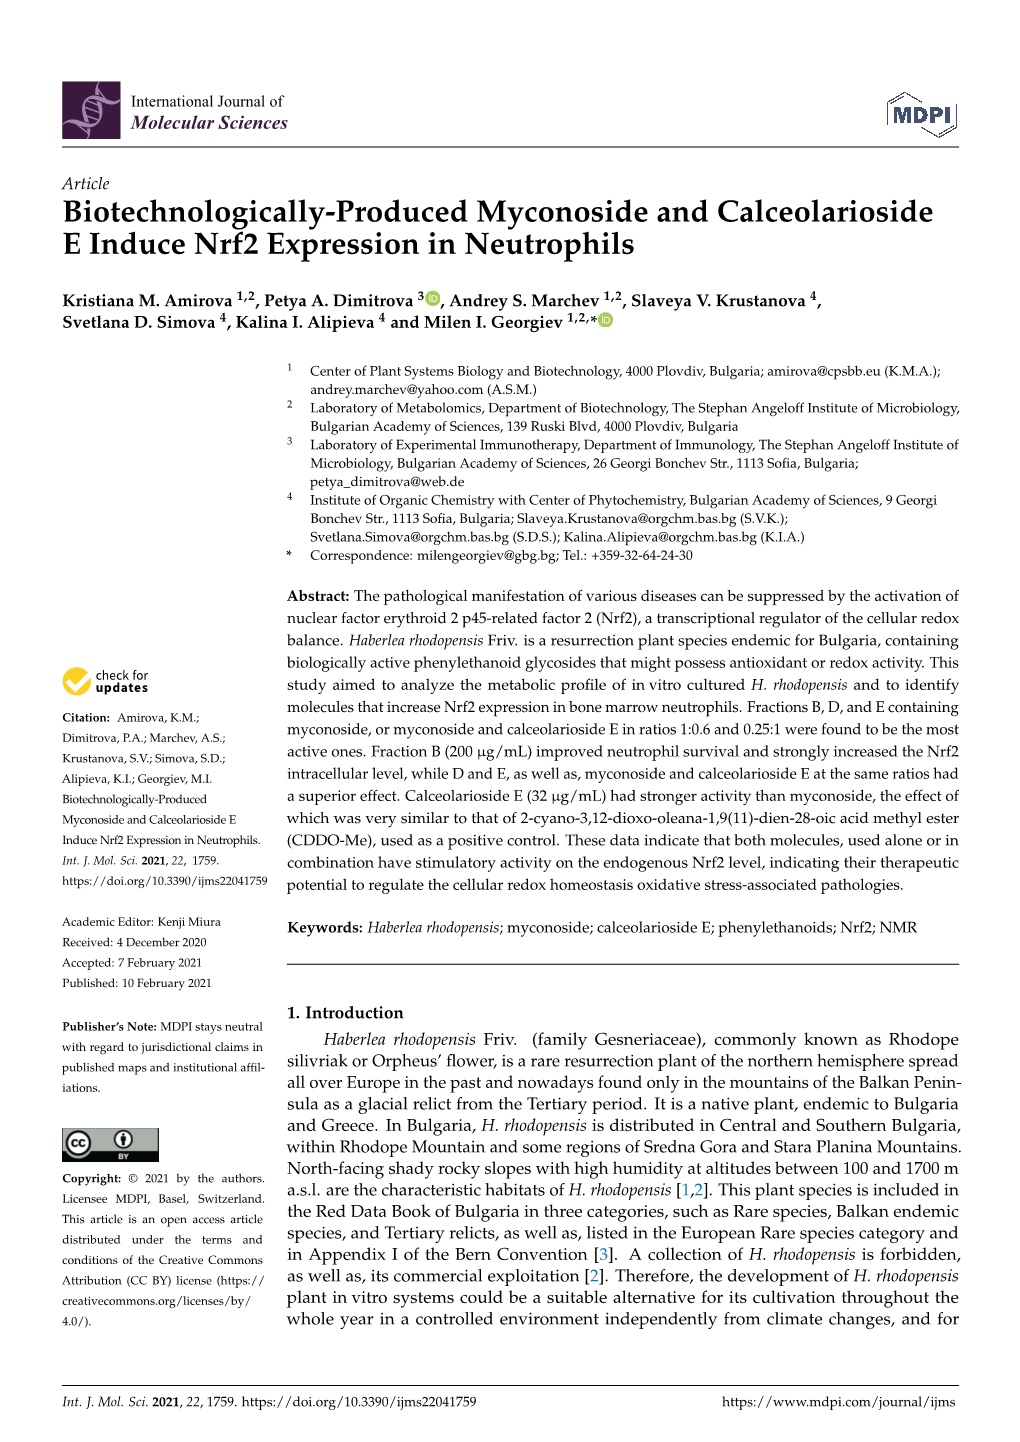 Biotechnologically-Produced Myconoside and Calceolarioside E Induce Nrf2 Expression in Neutrophils